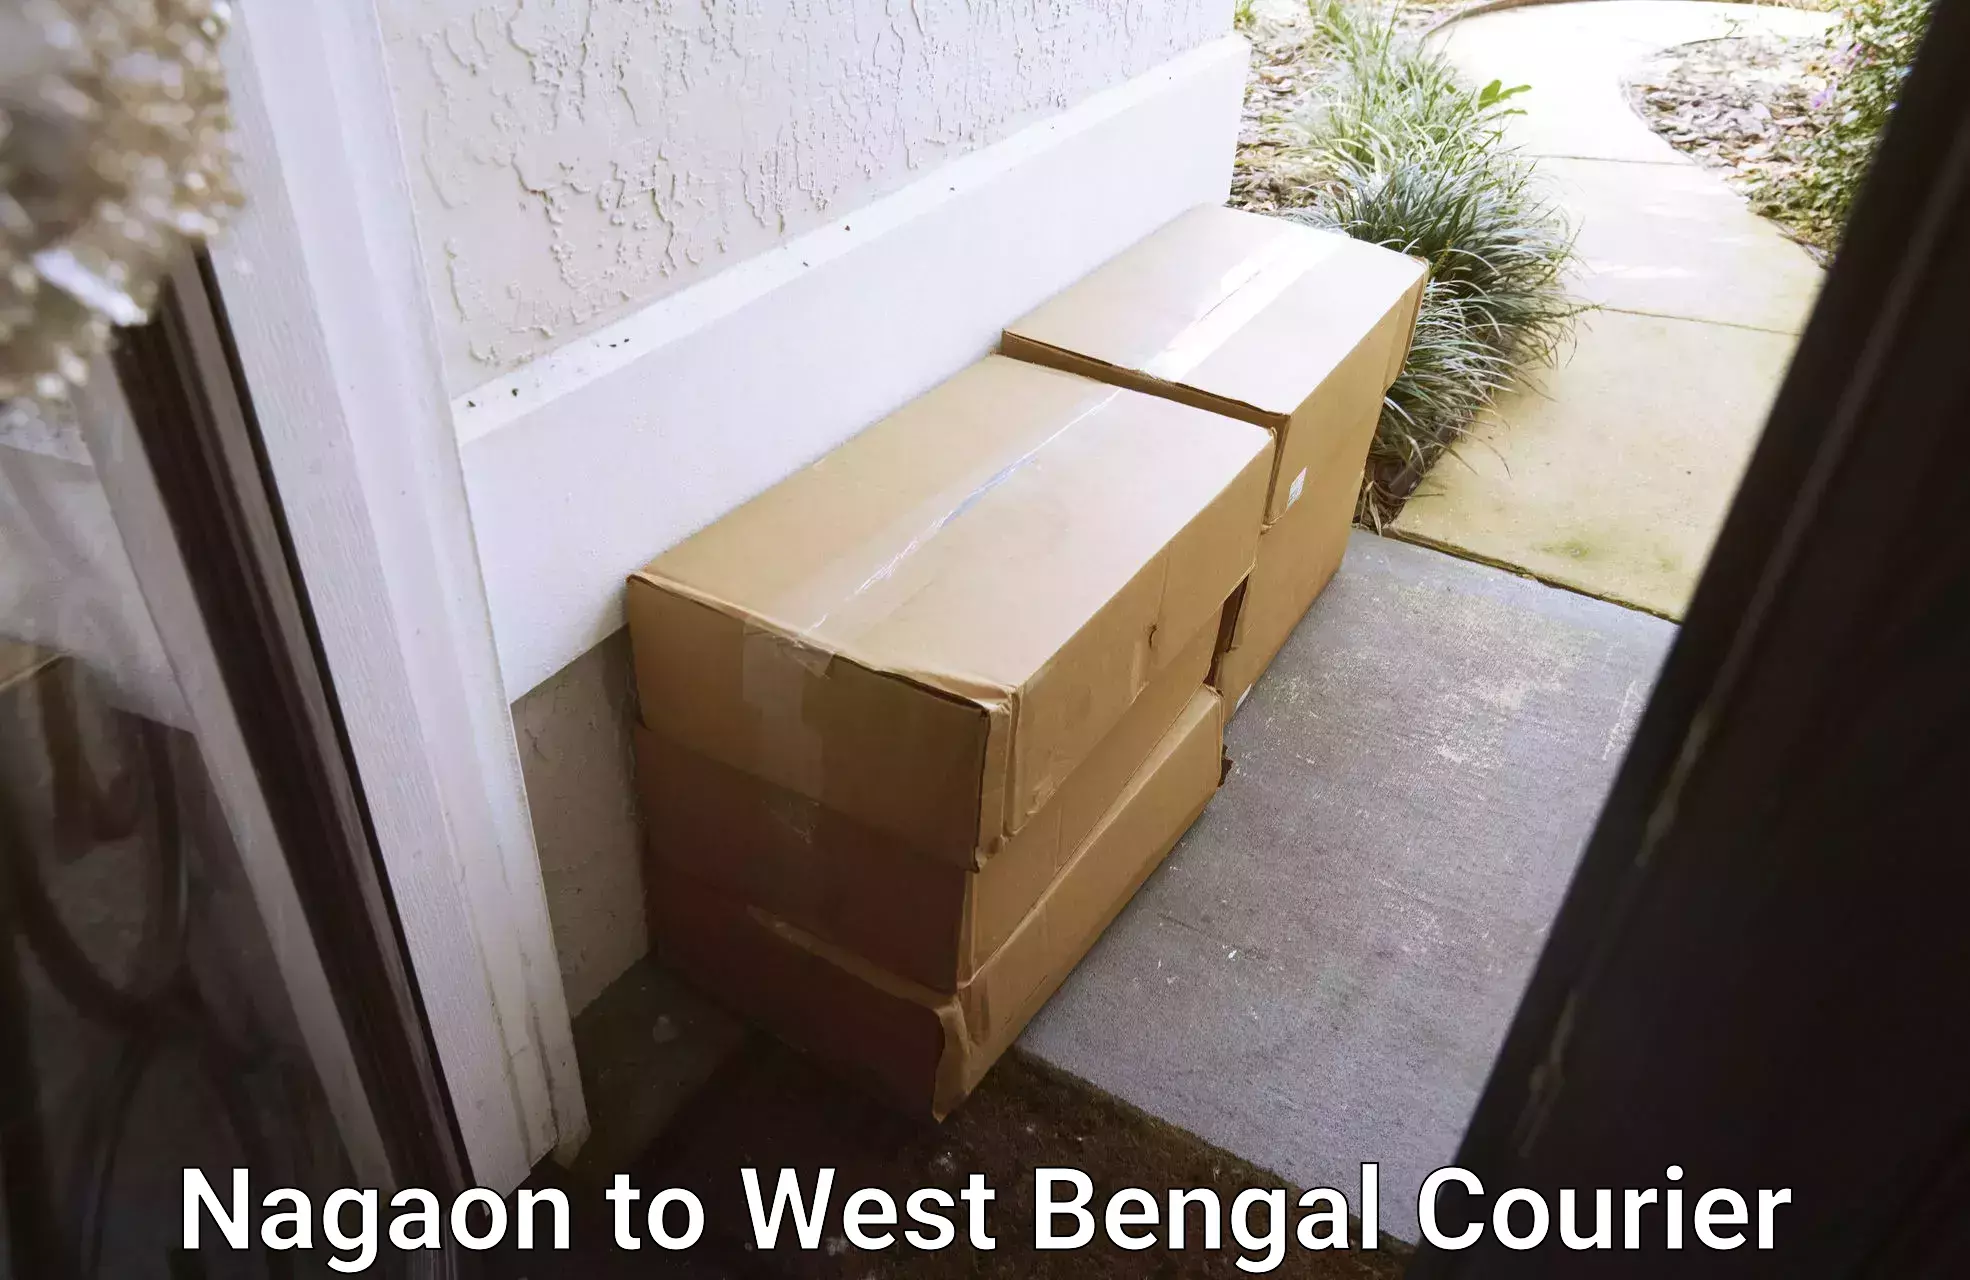 Smart shipping technology Nagaon to West Bengal